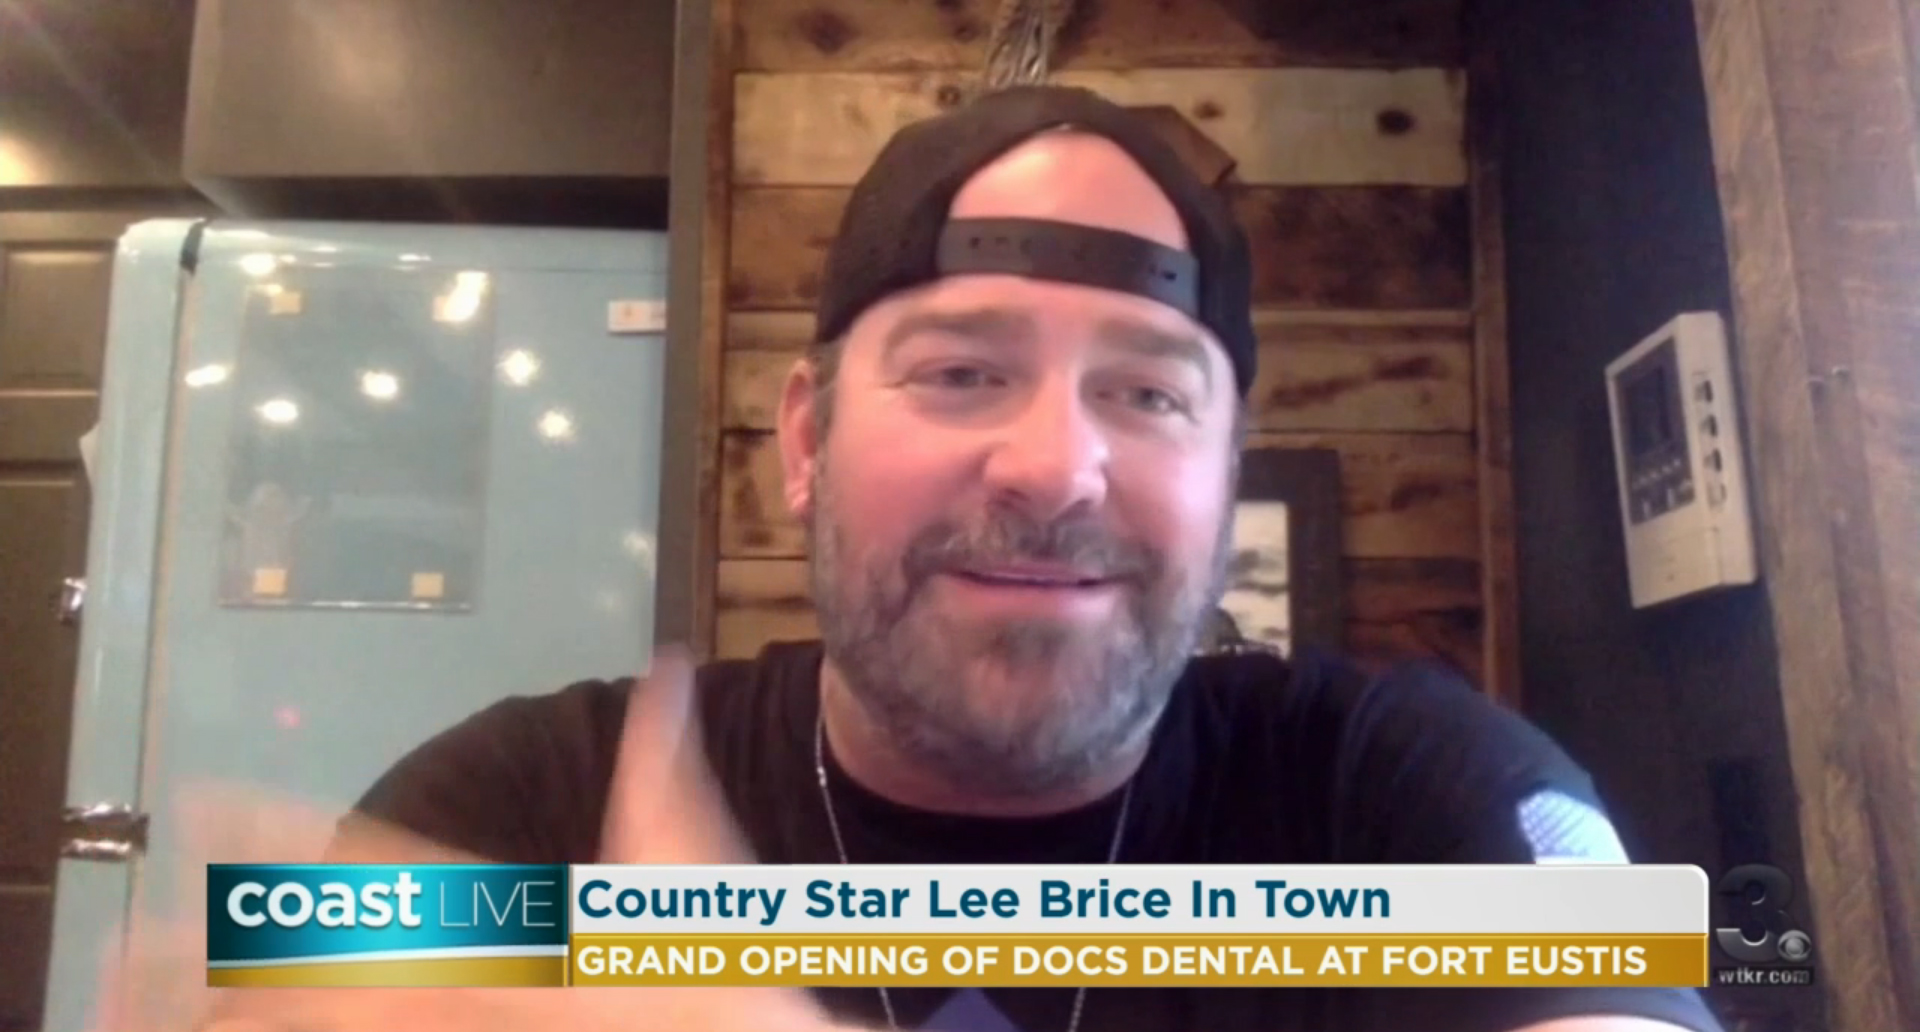 where does lee brice live